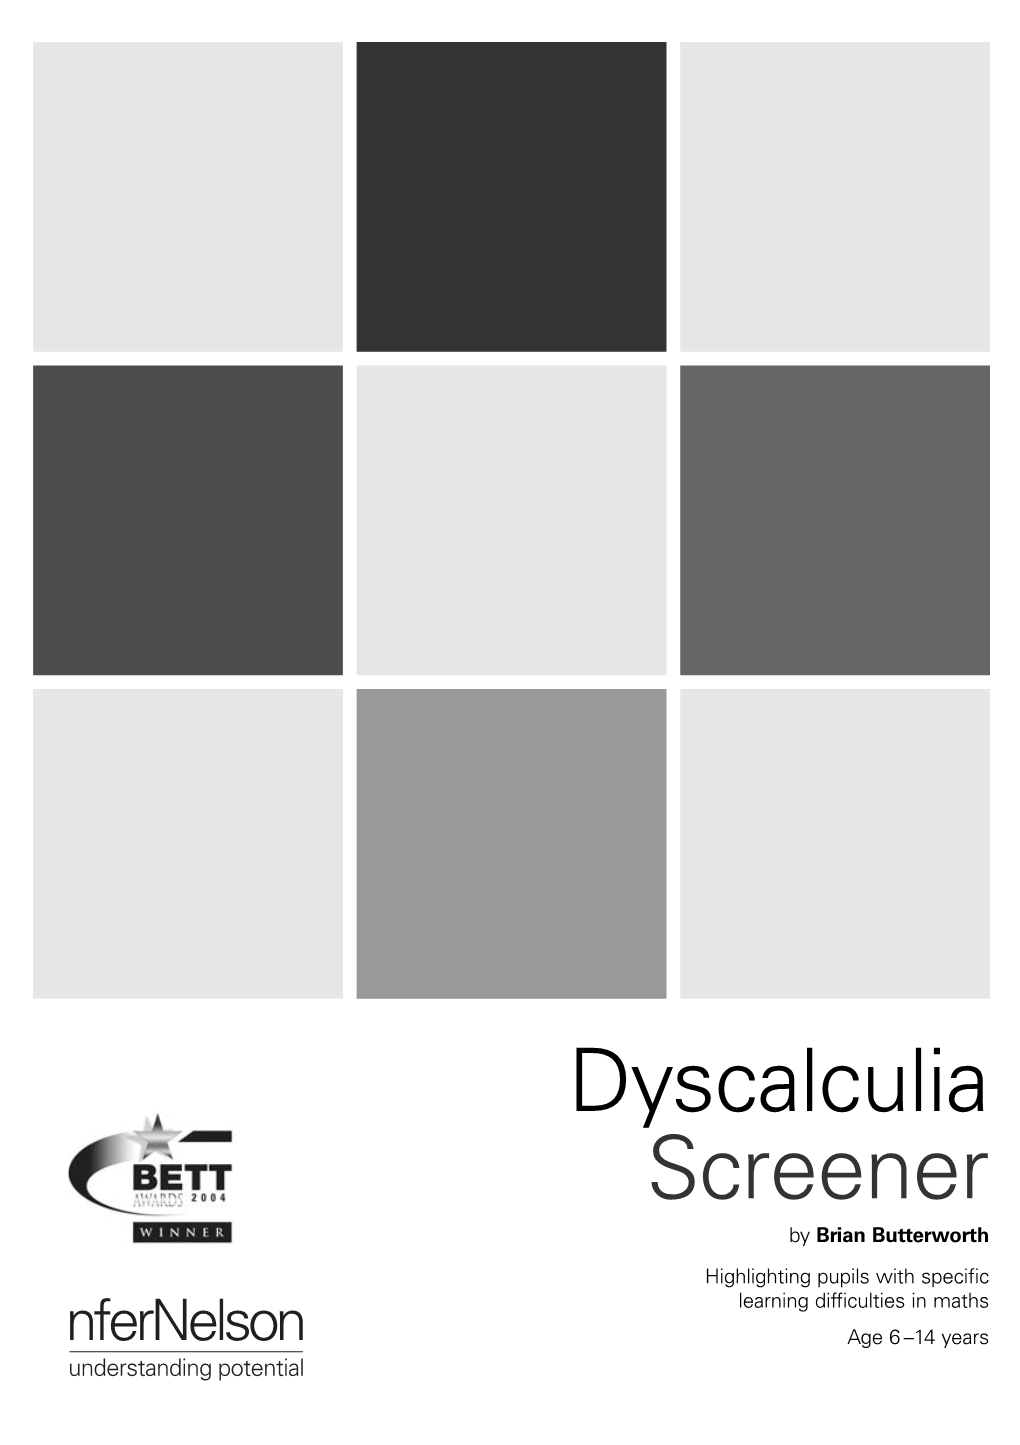 Dyscalculia Screener by Brian Butterworth Highlighting Pupils with Specific Learning Difficulties in Maths Age 6 –14 Years Copyright © Brian Butterworth 2003